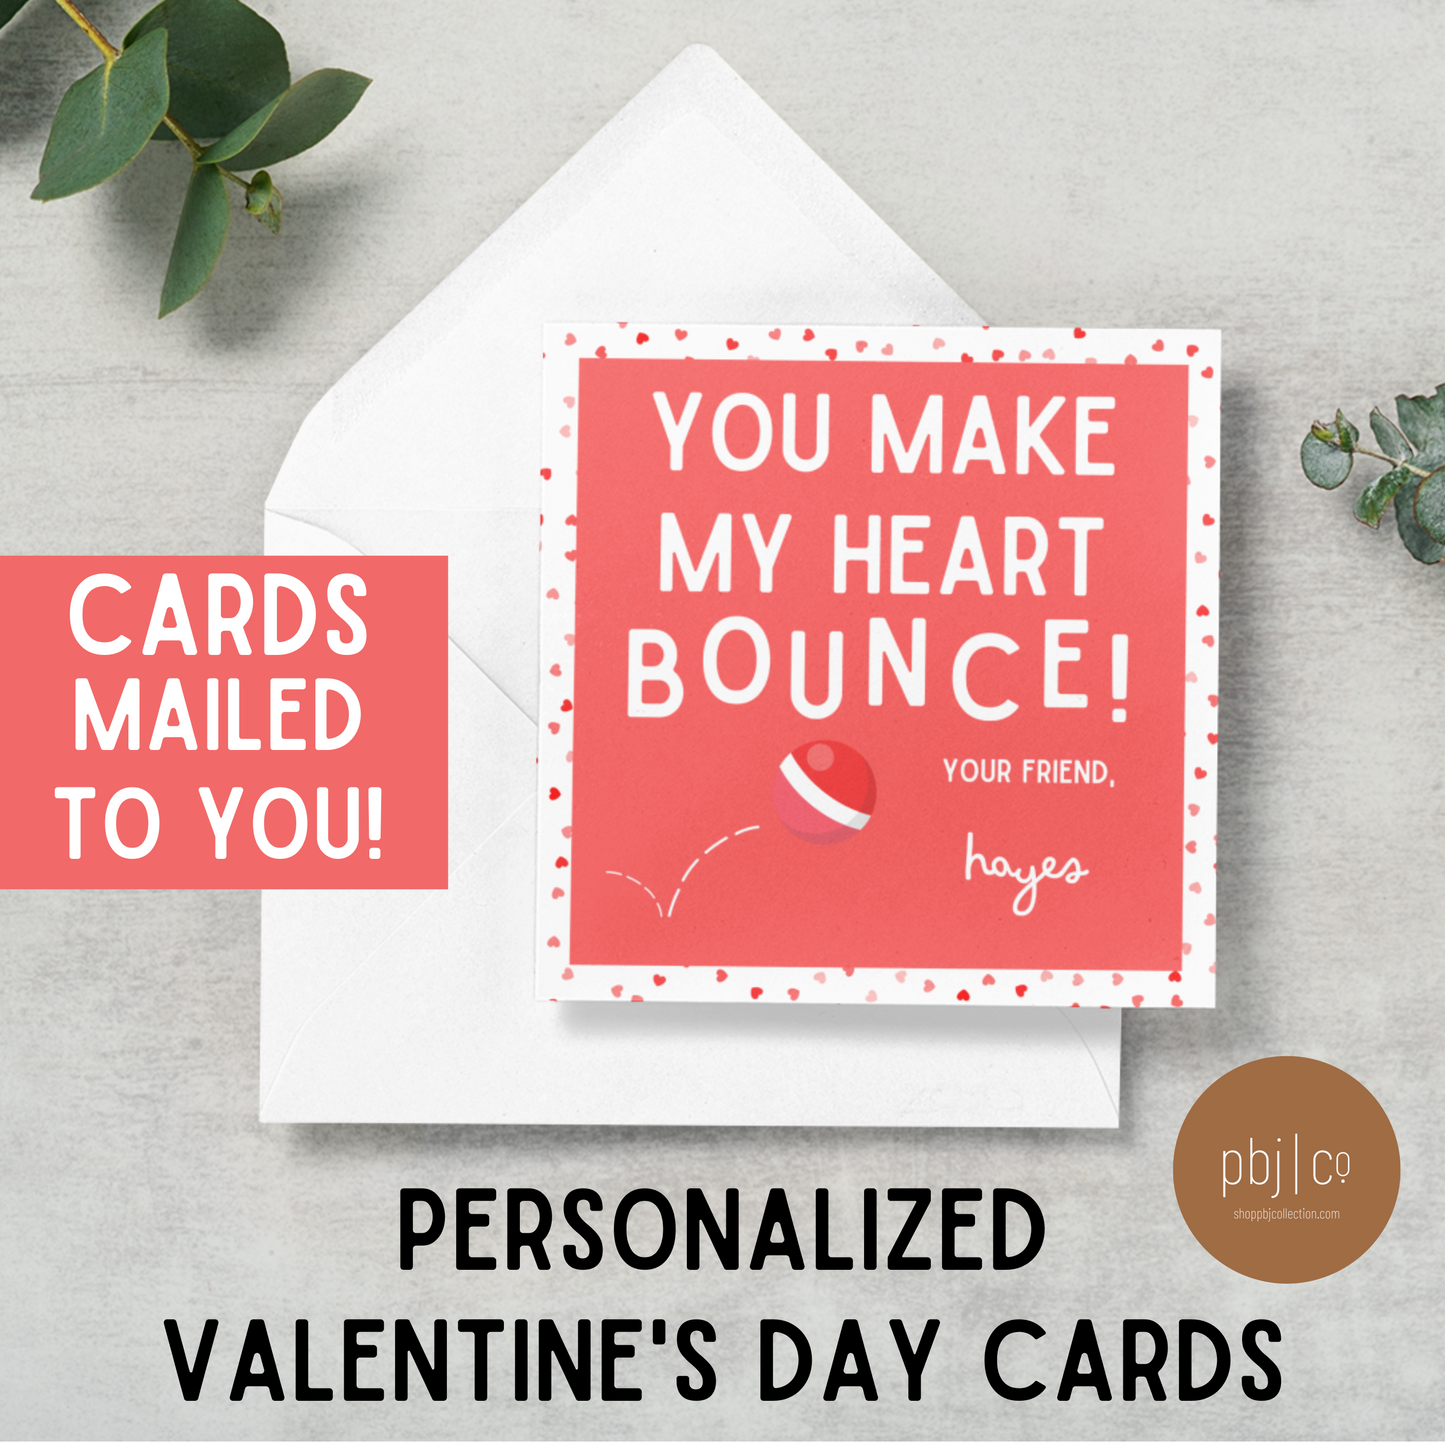 PRINTED Kids Customized Bouncy Ball Valentine's Day Set of 24 Cards Favors Boy Girl Valentines Gift Tag With Envelopes Classroom Daycare Teacher